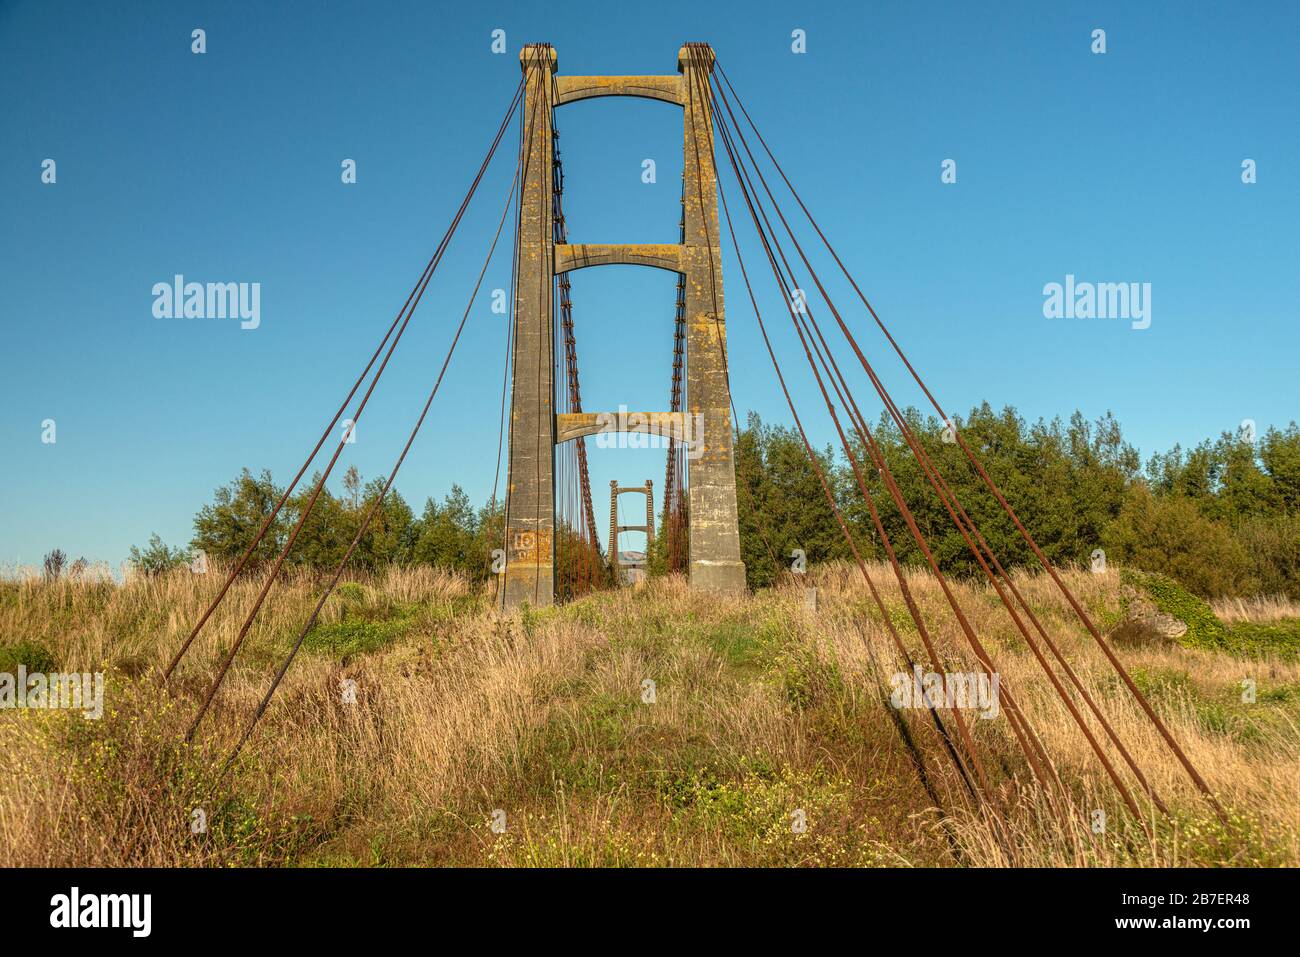 The abandoned and overgrown Opiki toll bridge from the 1800's flax industry on the Manawatu river, near Palmerston North, New Zealand. Stock Photo